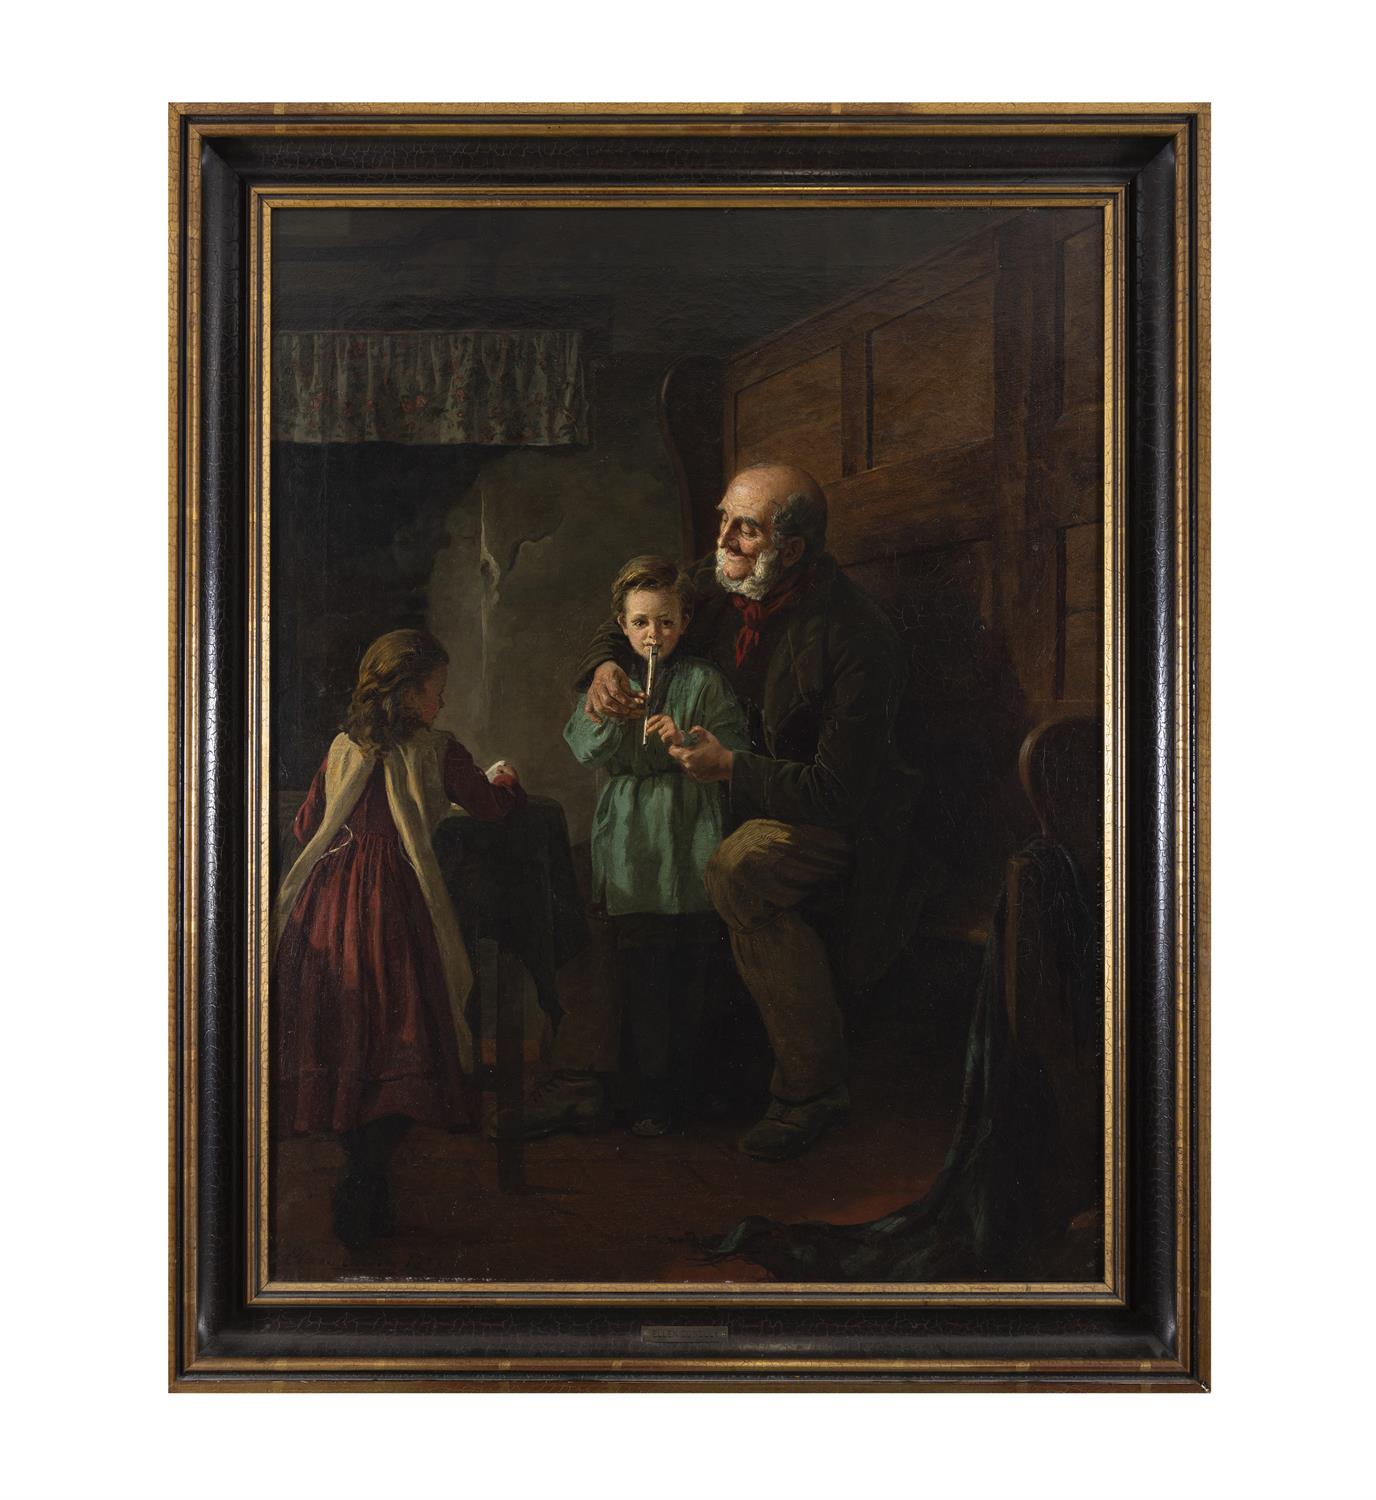 ELLEN CONOLLY RA (FL. 1873-85) A Music Lesson Oil on canvas, 89.5 x 69.5cm (35¼ x 27¼") Signed - Image 2 of 5